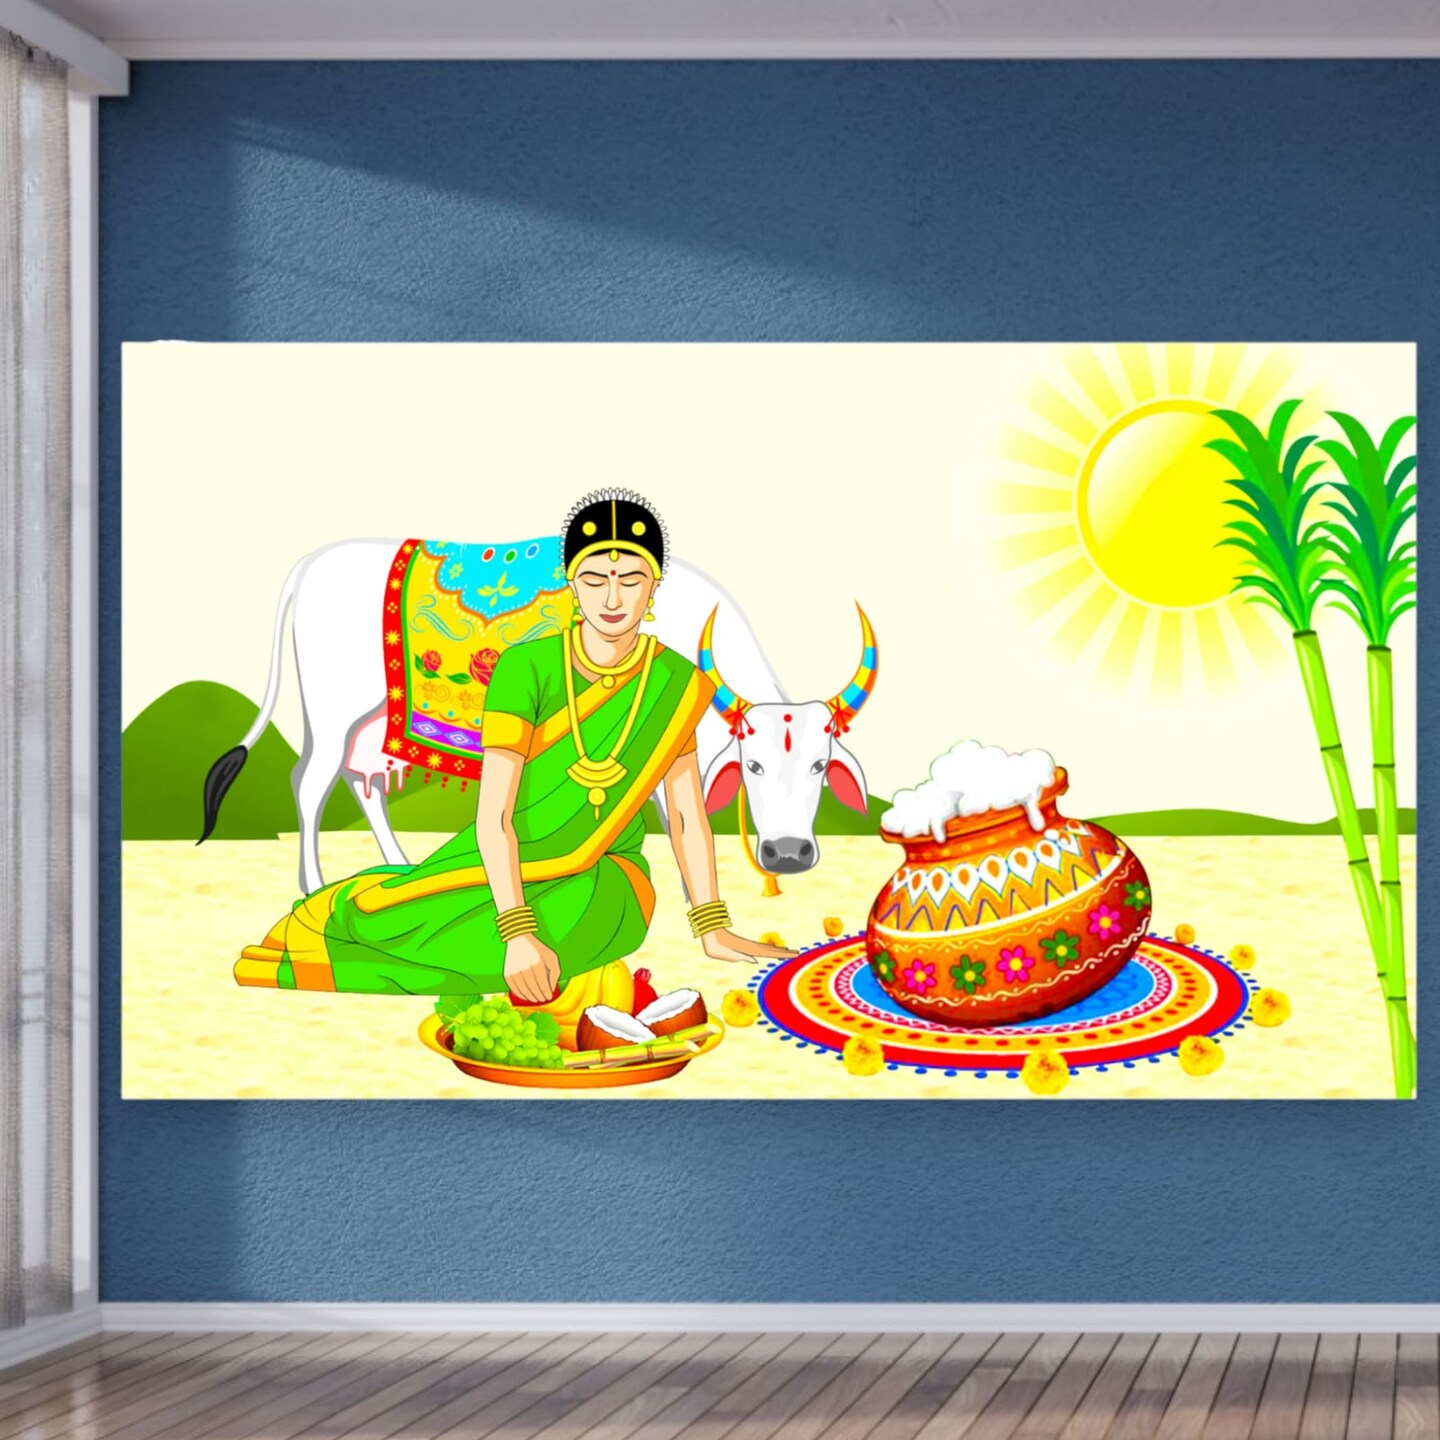 SK Graphics Happy Pongal Switch Wall Sticker (Multicolor PVC Vinyl) :  Amazon.in: Home & Kitchen